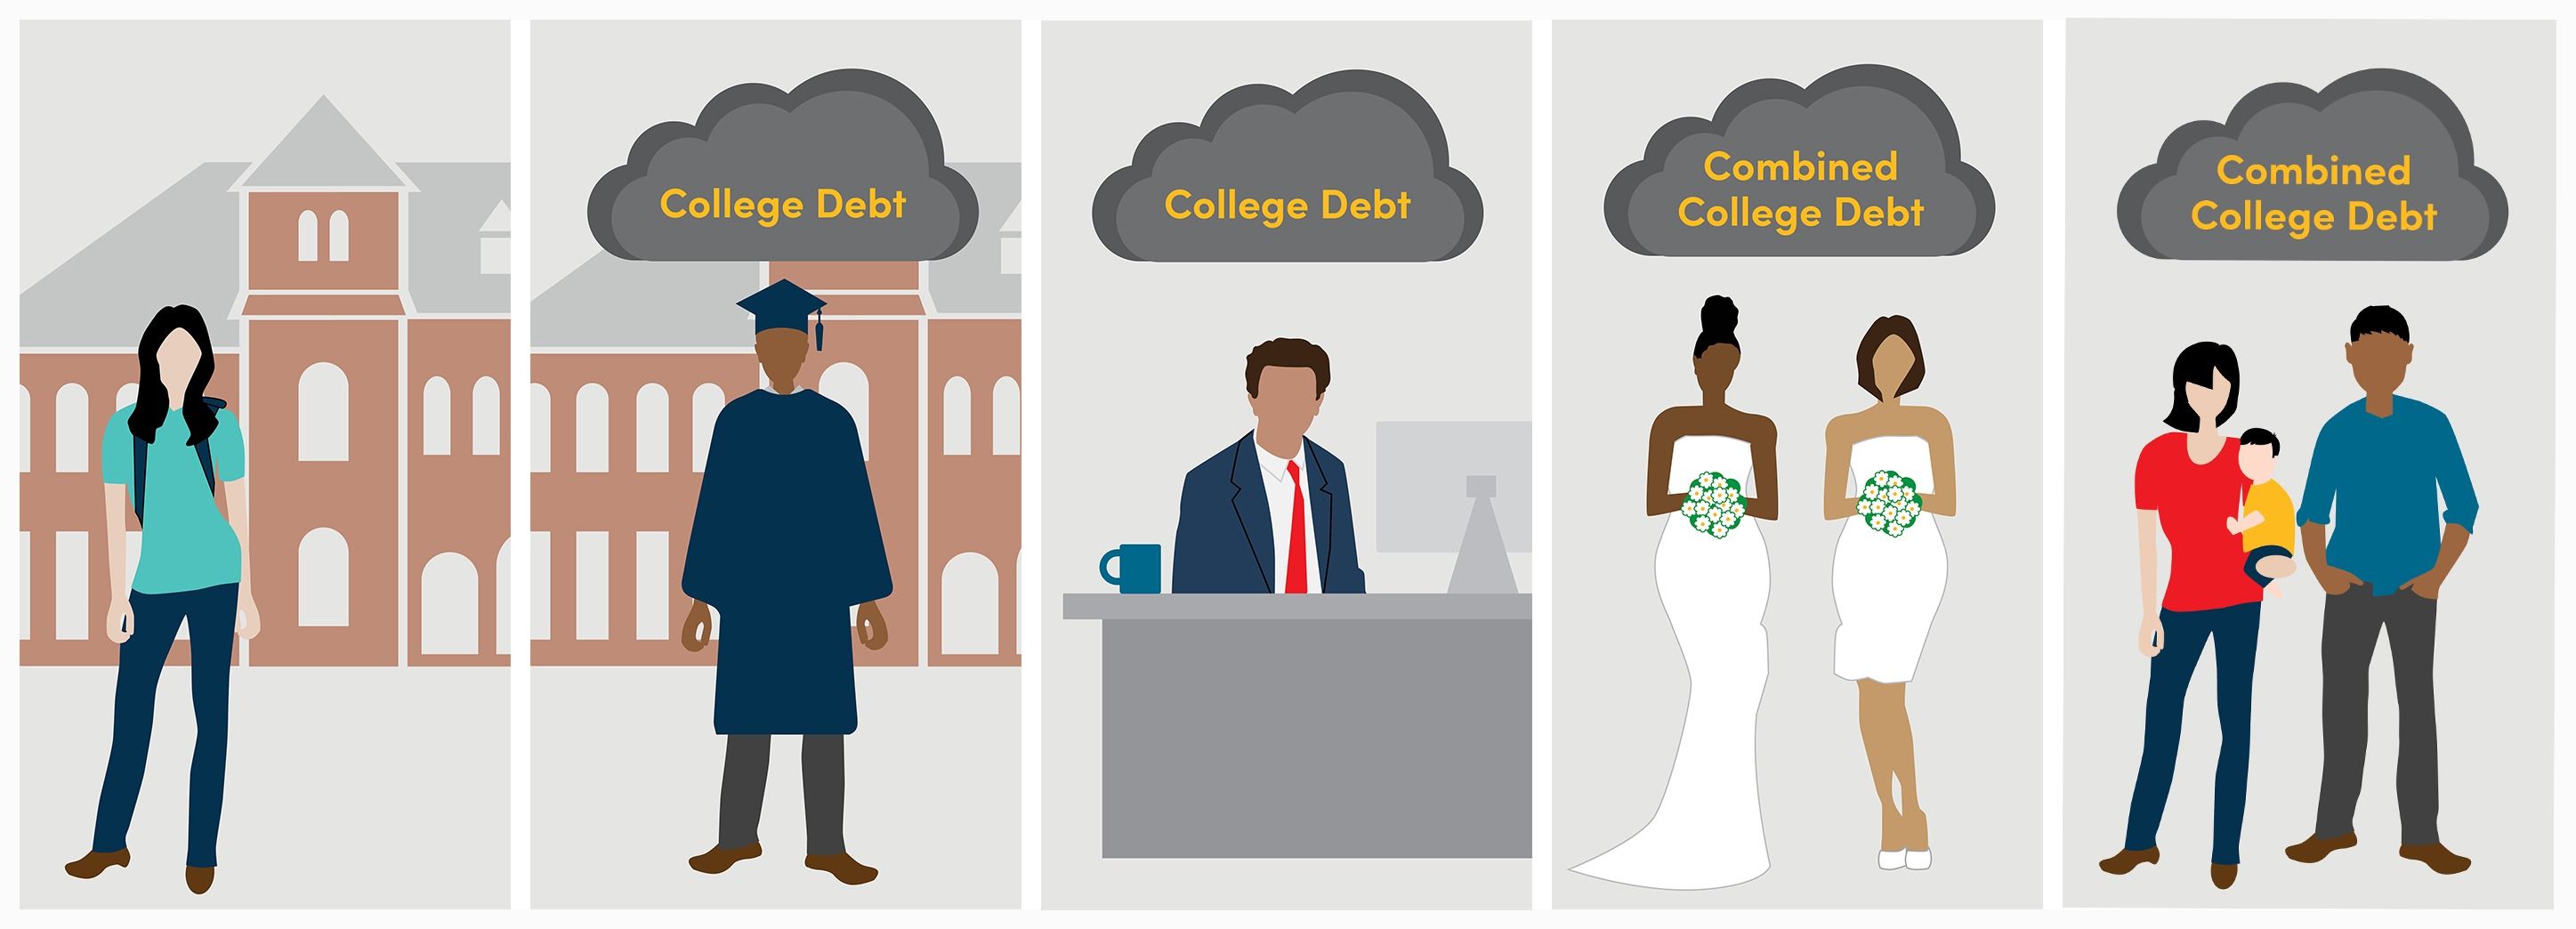 A series of images showing how college debt collects after serious relationships